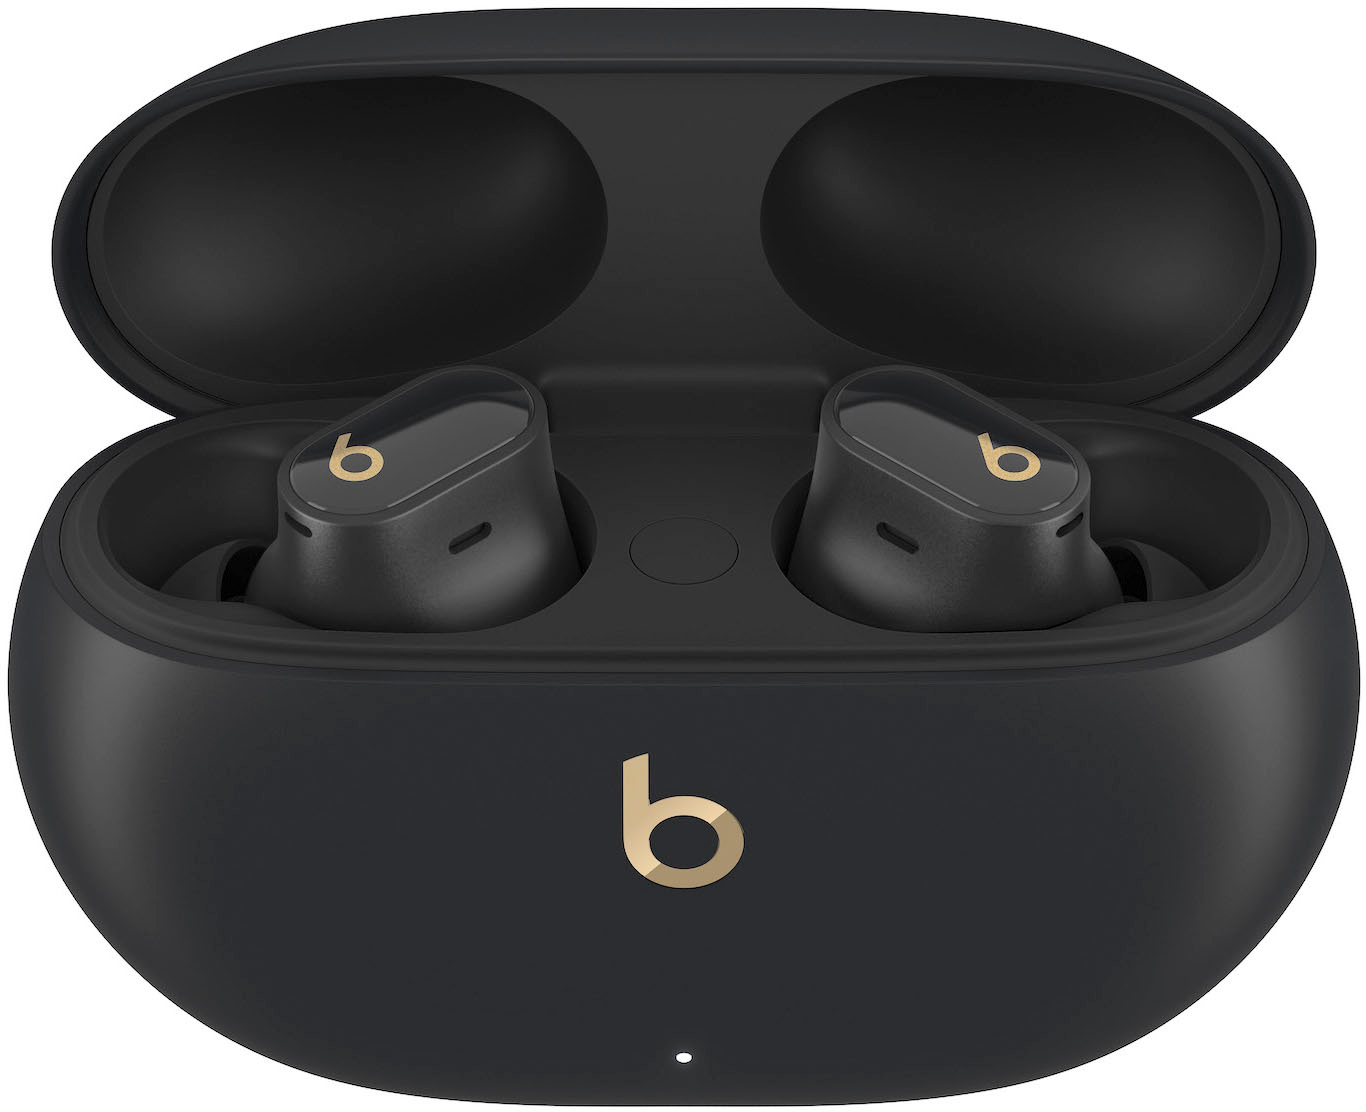 Beats Studio Buds Totally Wireless Noise Cancelling Earbuds White